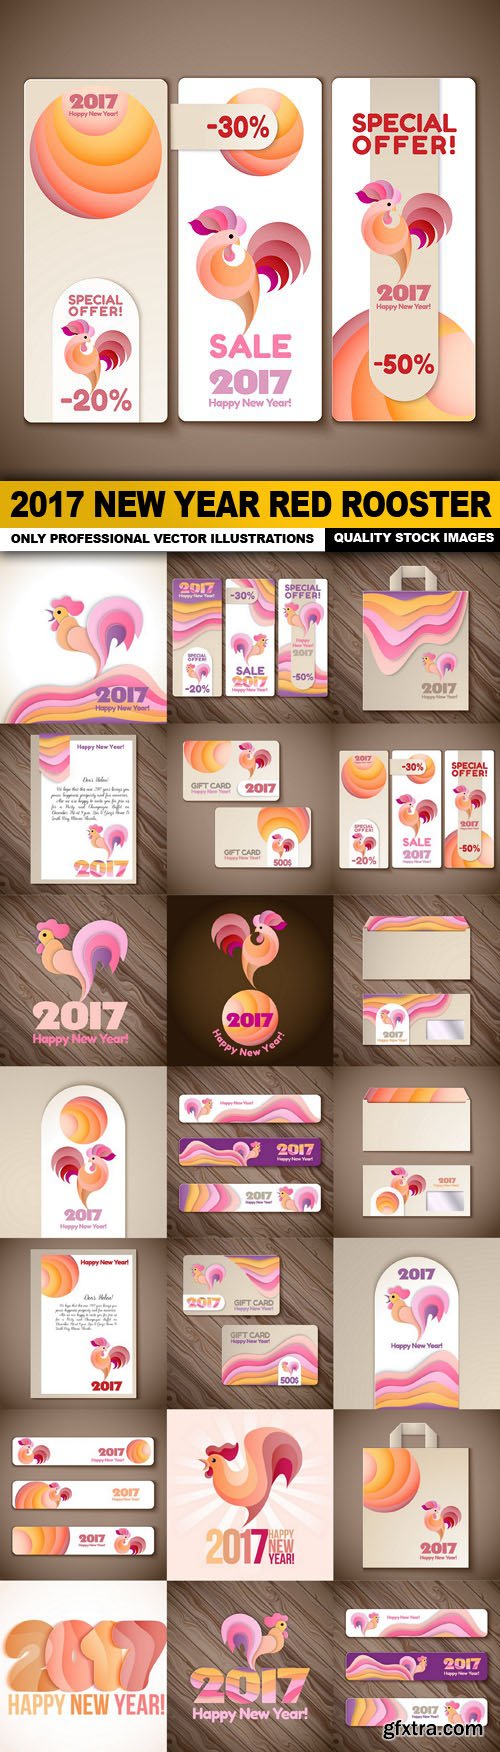 2017 New Year Red Rooster - 20 Vector